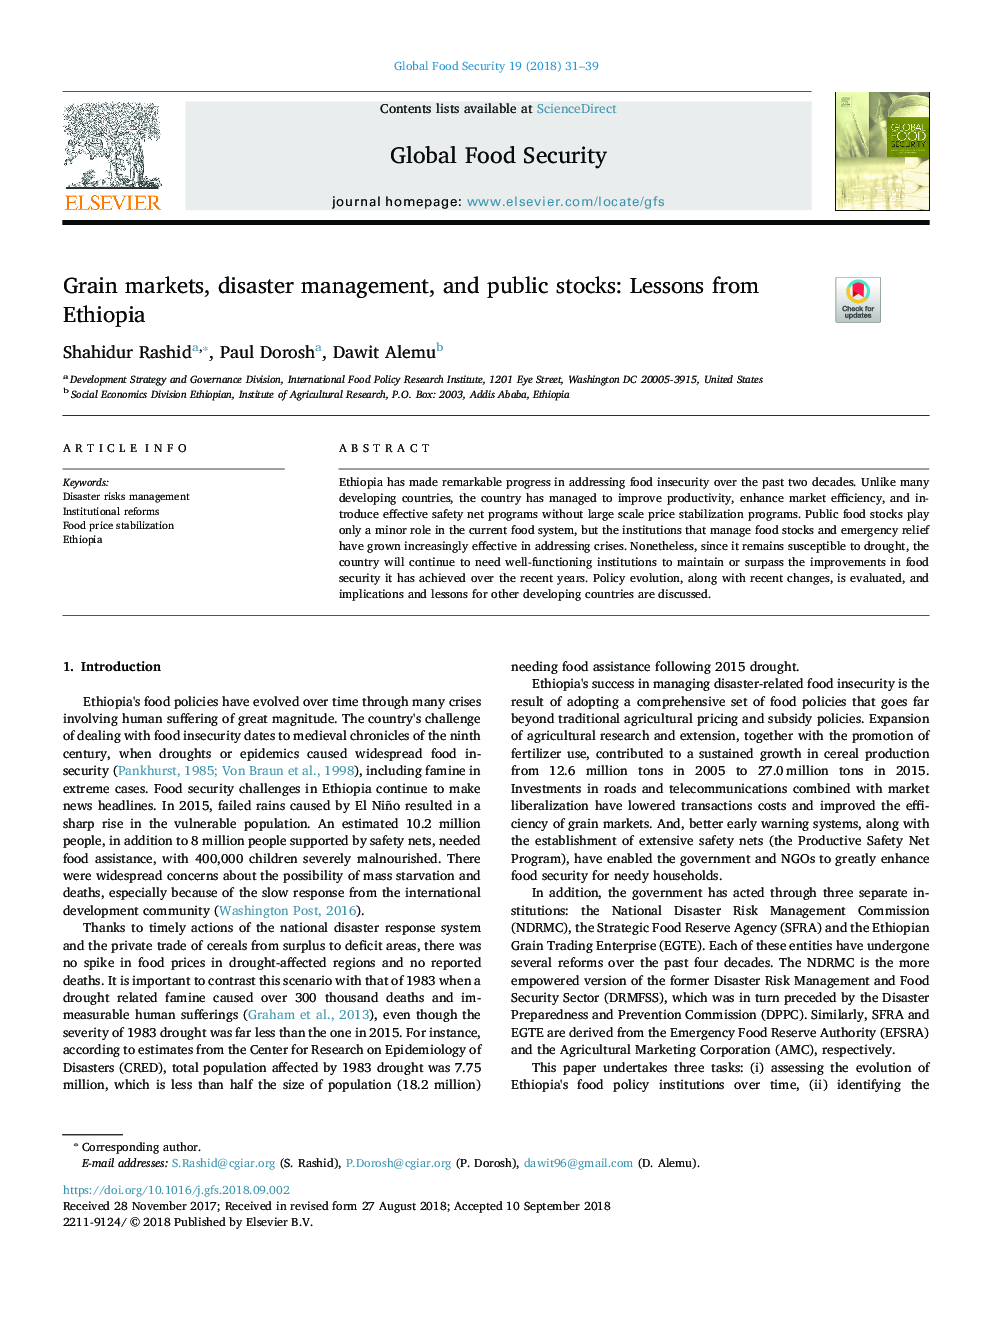 Grain markets, disaster management, and public stocks: Lessons from Ethiopia